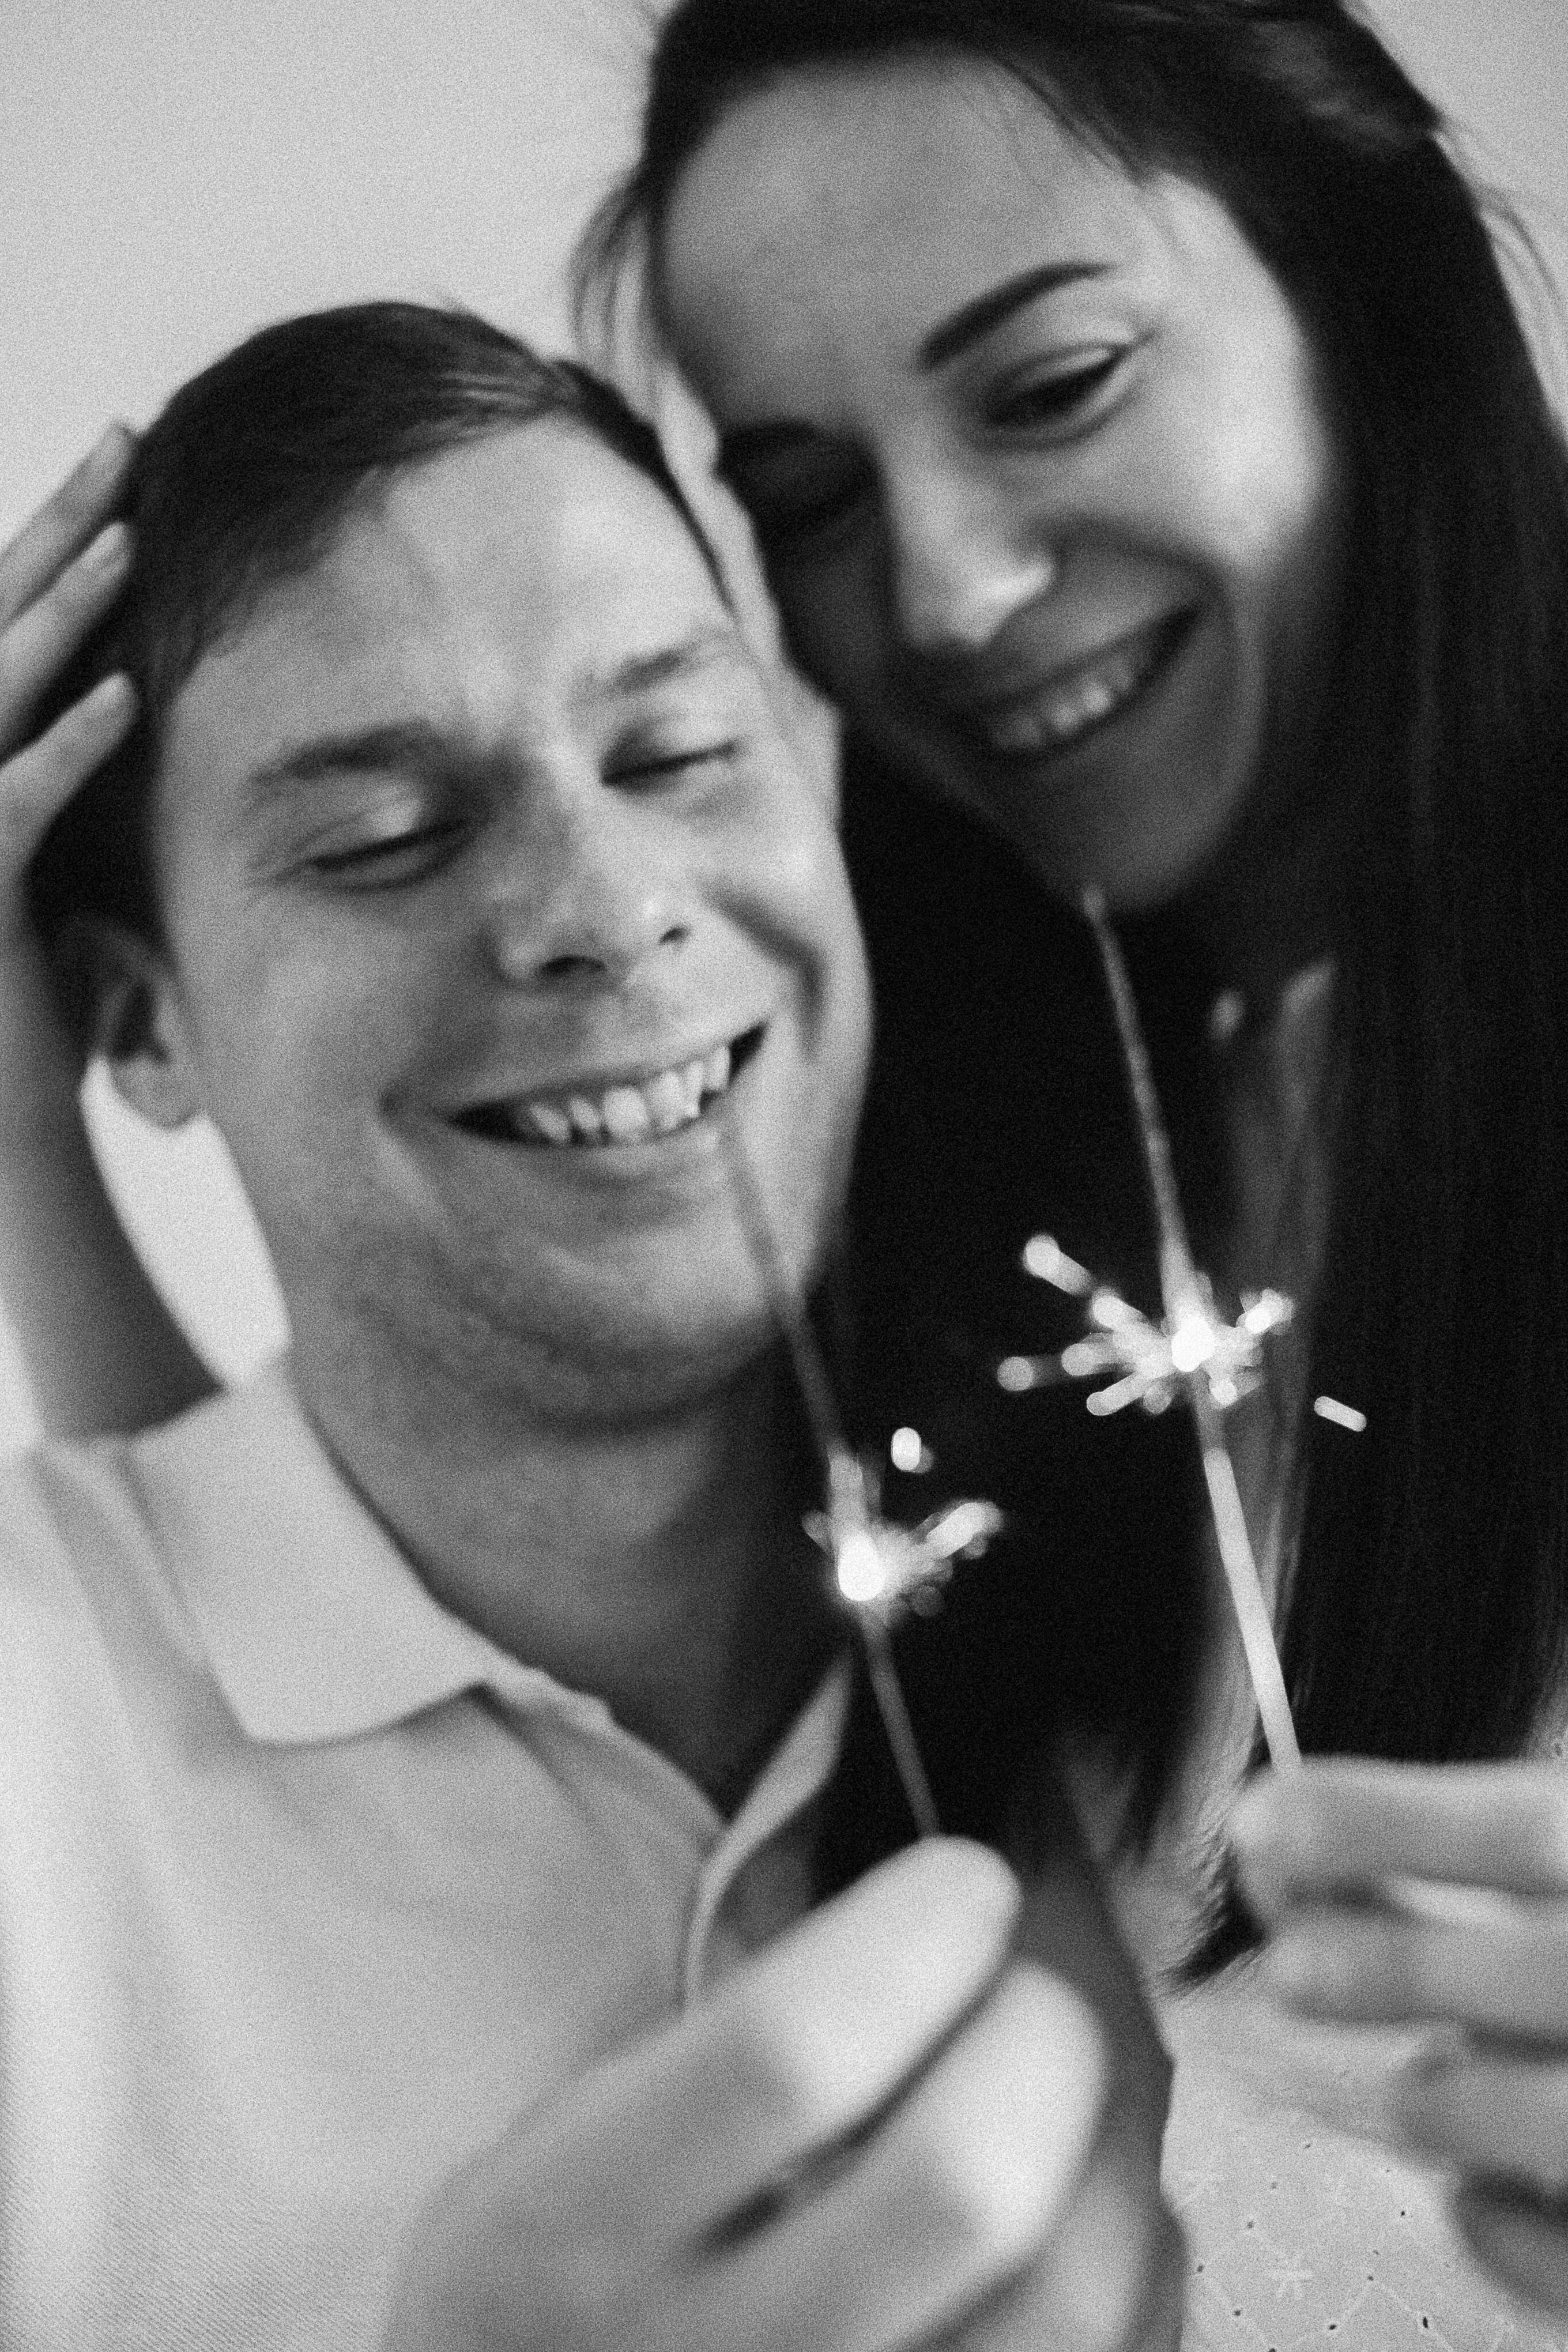 Couple holding sparklers | Source: Pexels